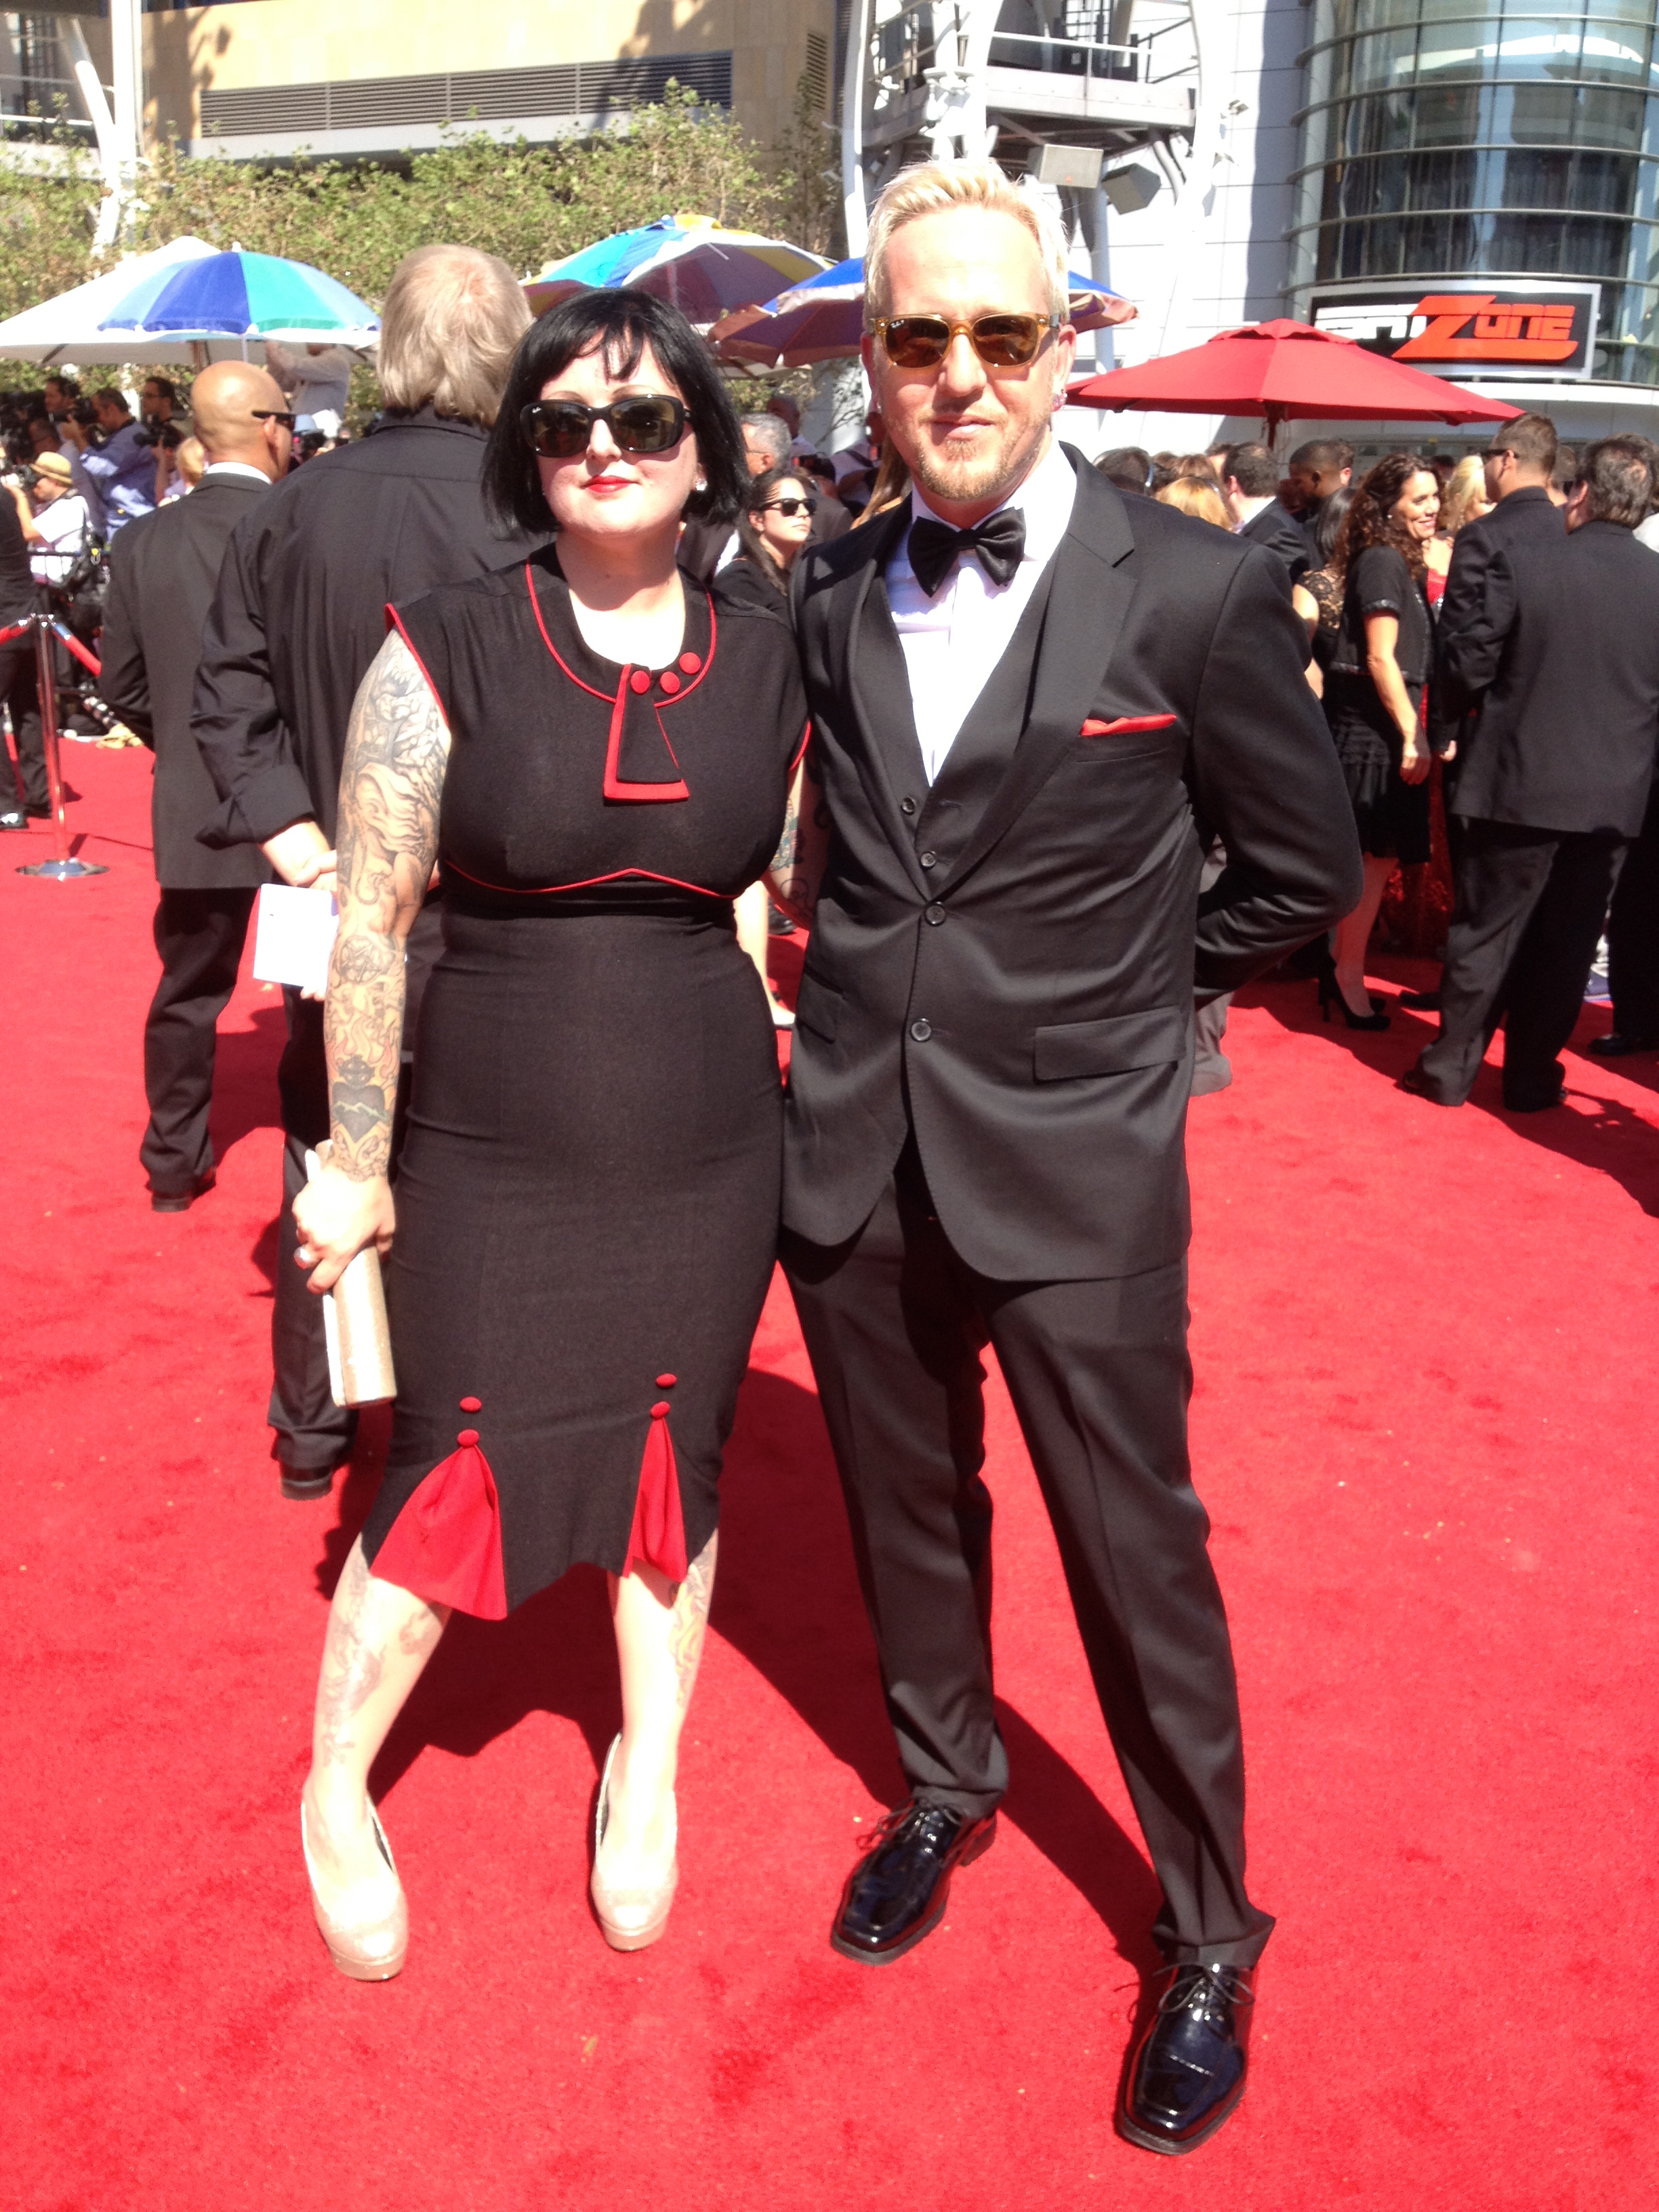 Ani Kyd & Toby Lindala on the red carpet at the 2012 Creative Arts Emmys at the Nokia Theatre on Saturday, Sept. 15, 2012, in Los Angeles, CA.